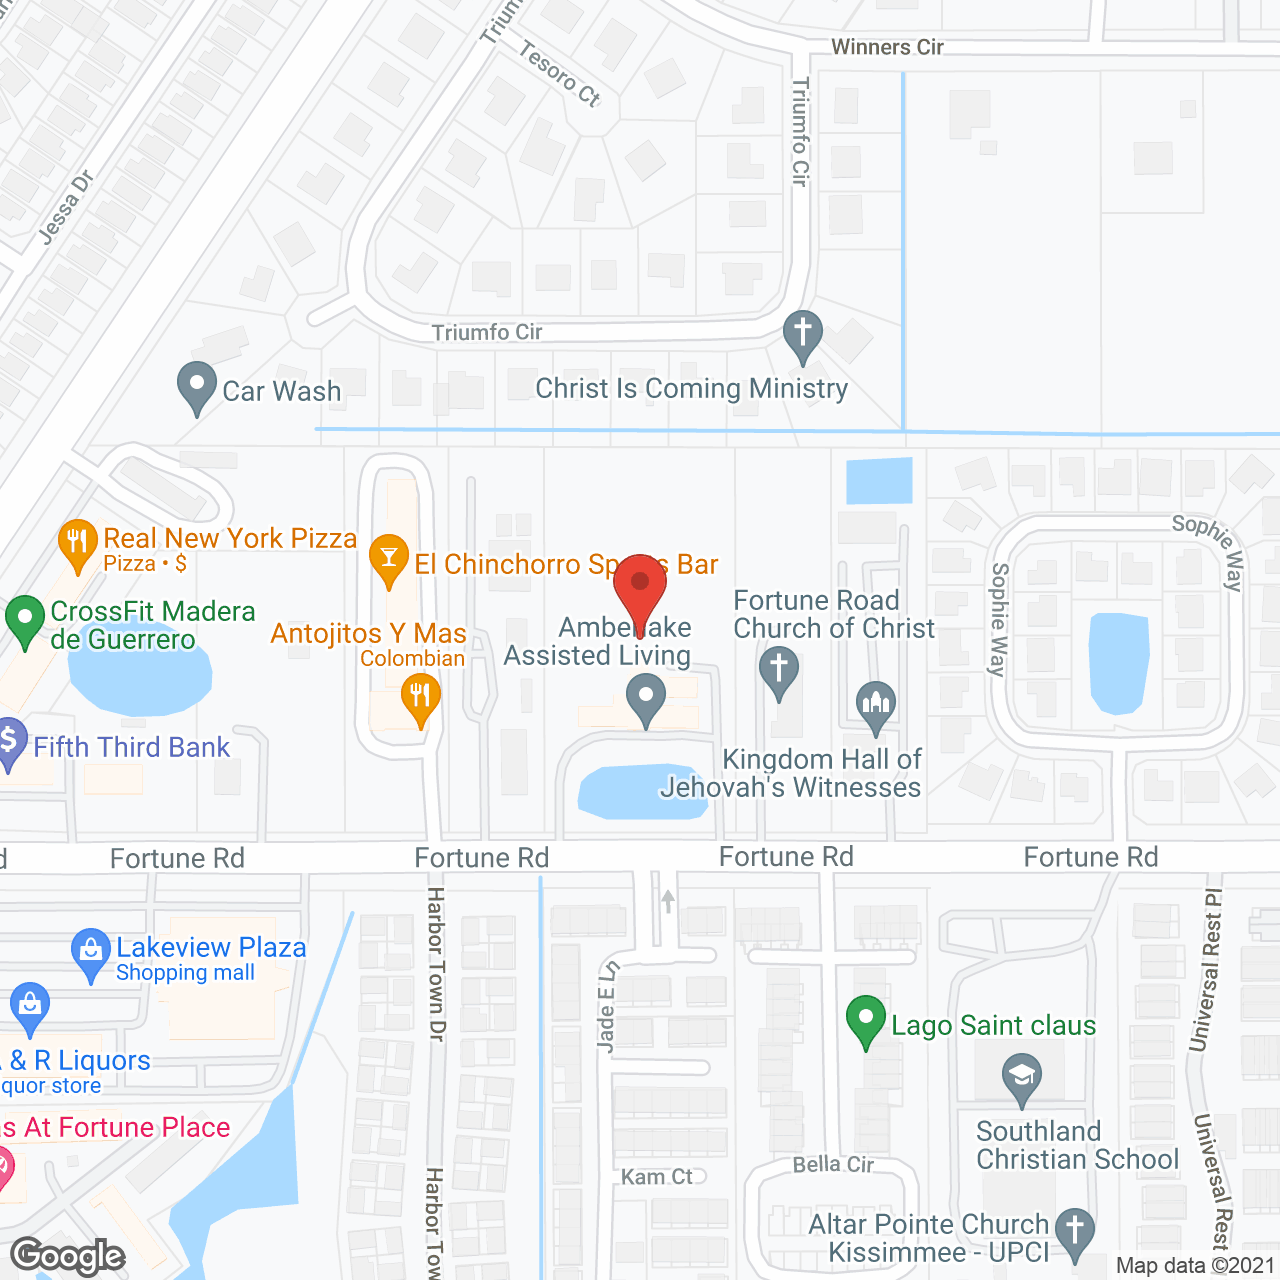 Amber Lake Assisted Living Facility in google map